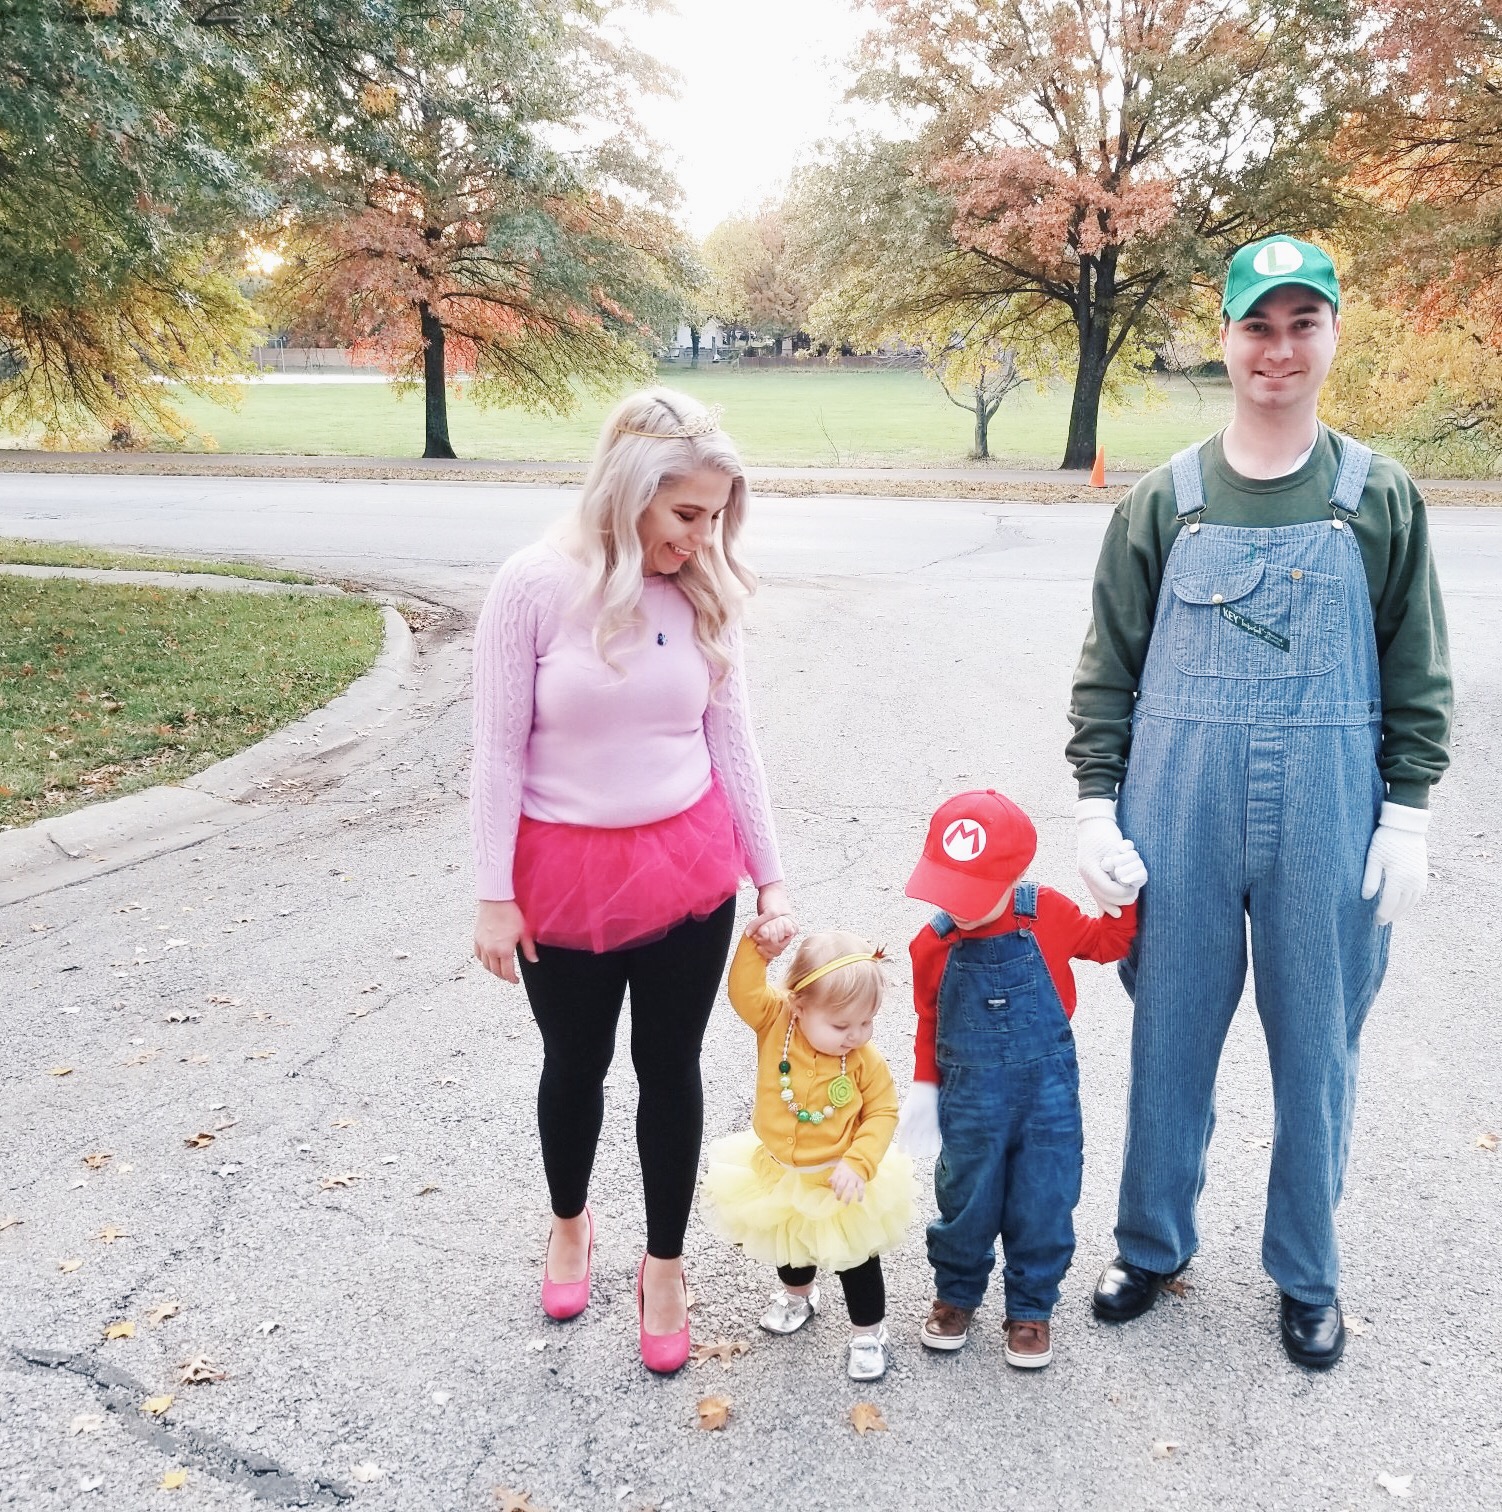 Super Mario Halloween Costumes Family - DIY Family Halloween Costume Ideas for the Super Mario-loving family! Mario Costume, Luigi Costume, Princess Peach Costume, and Princess Daisy Costume come together for a Super Mario Family Halloween Costume that will surely be a hit! #Halloween #FamilyCostumes #Mario